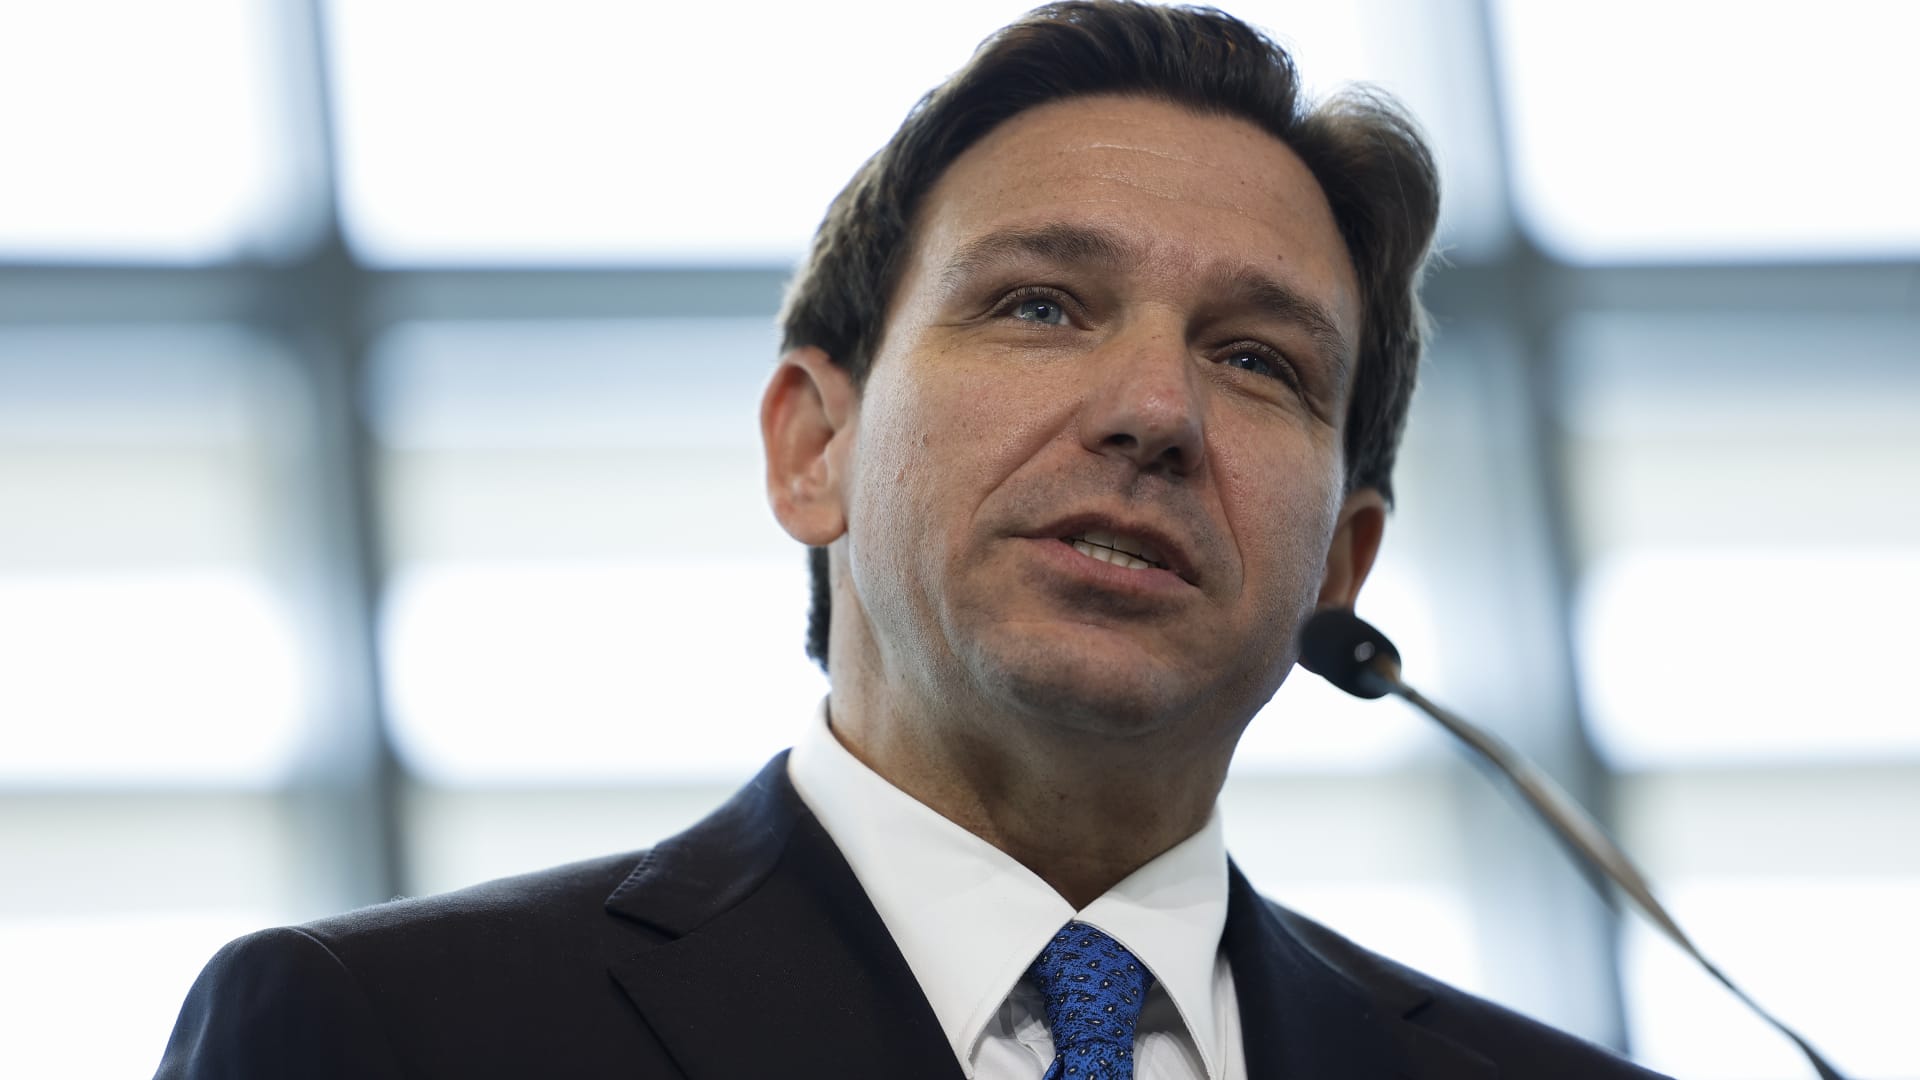 Not just Disney: DeSantis brings history of business battles to the presidential campaign